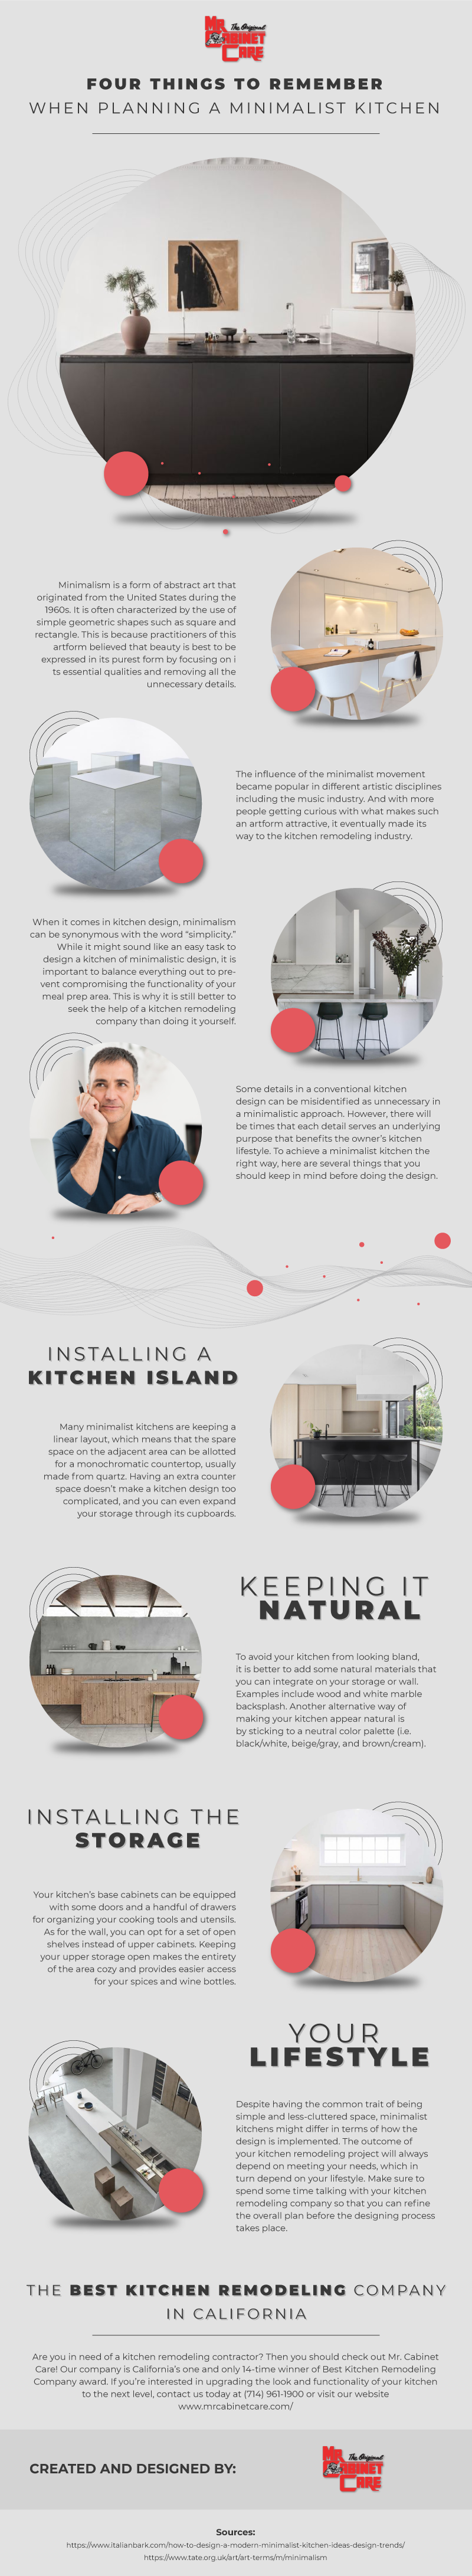 Four Things to Remember When Planning a Minimalist Kitchen - Infographic